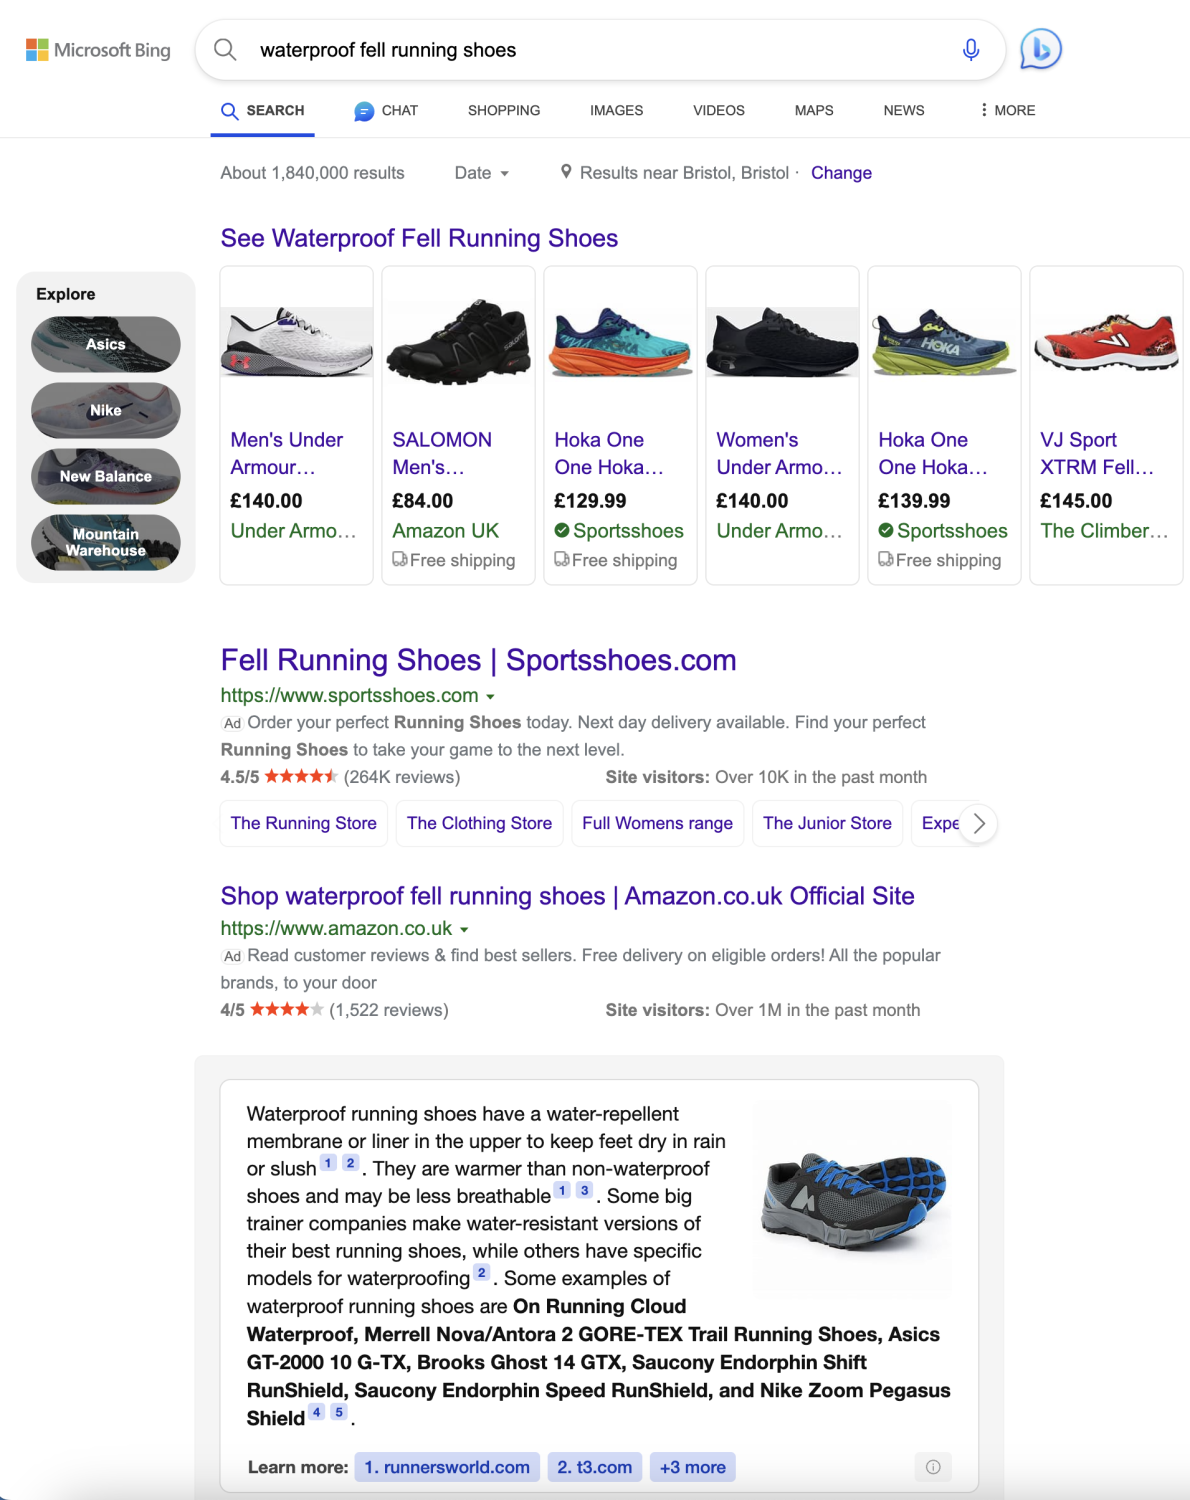 Screen shot of Bing Search Results Page following a search for Waterproof fell running shoes